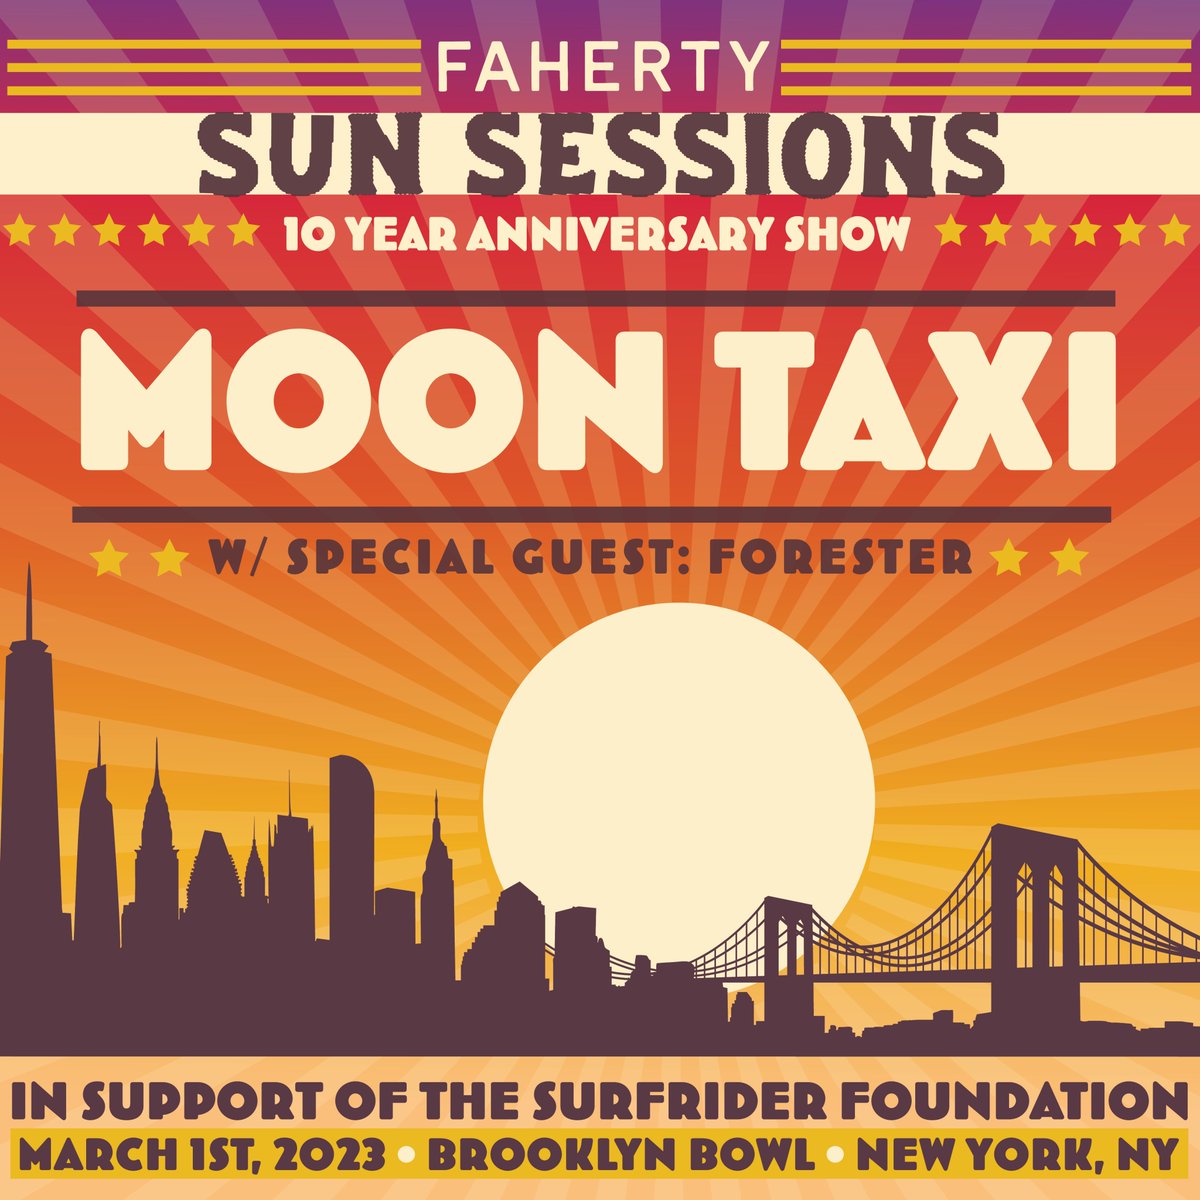 Last call to get your tickets for Faherty’s 10-Year Anniversary event at the @brooklynbowl on 3/1! Featuring a special Sun Sessions show with @MoonTaxi & @forestermusic. A portion of proceeds will be donated to Surfrider. Secure your tickets today: ticketweb.com/event/moon-tax…